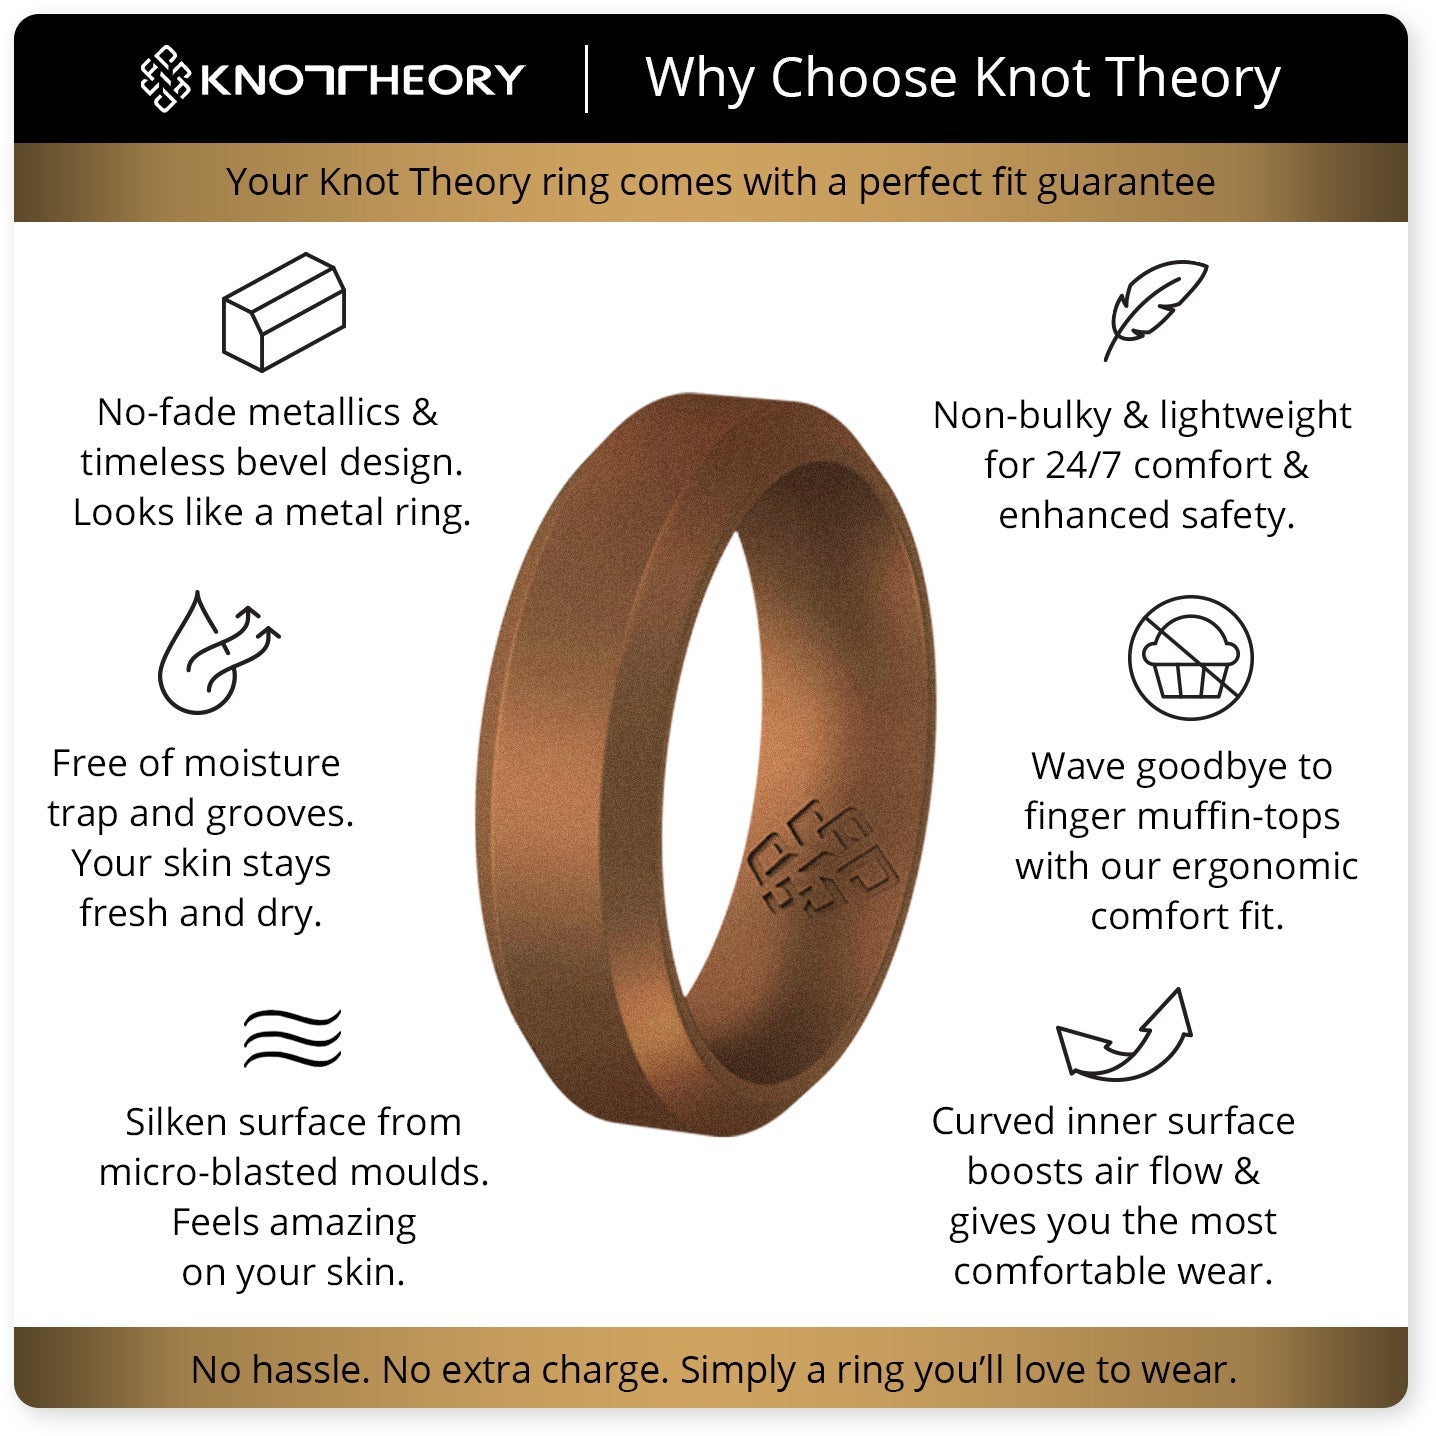 Aged Copper Bevel Edge Breathable Silicone Ring For Men and Women - Knot Theory